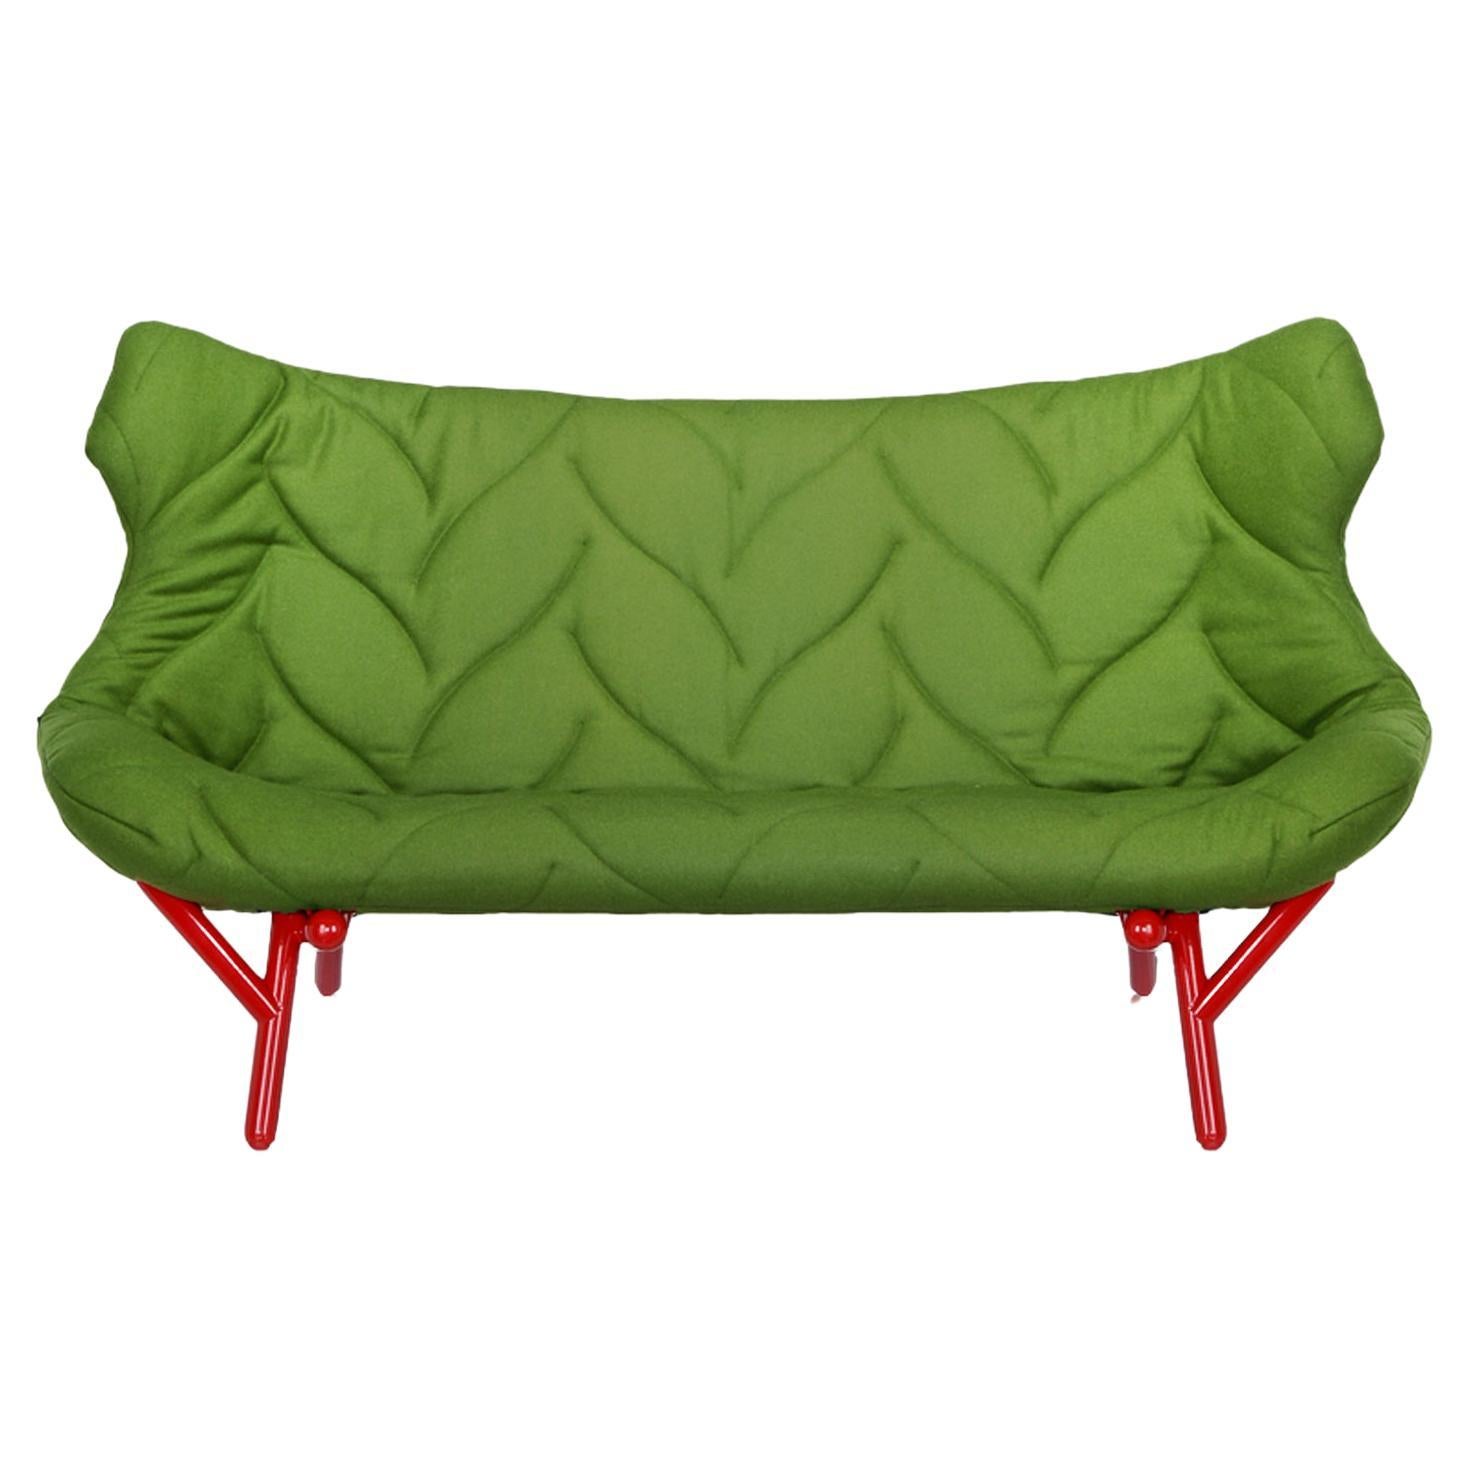 Kartell Foliage Sofa Trevira Green by Patricia Urquiola  For Sale